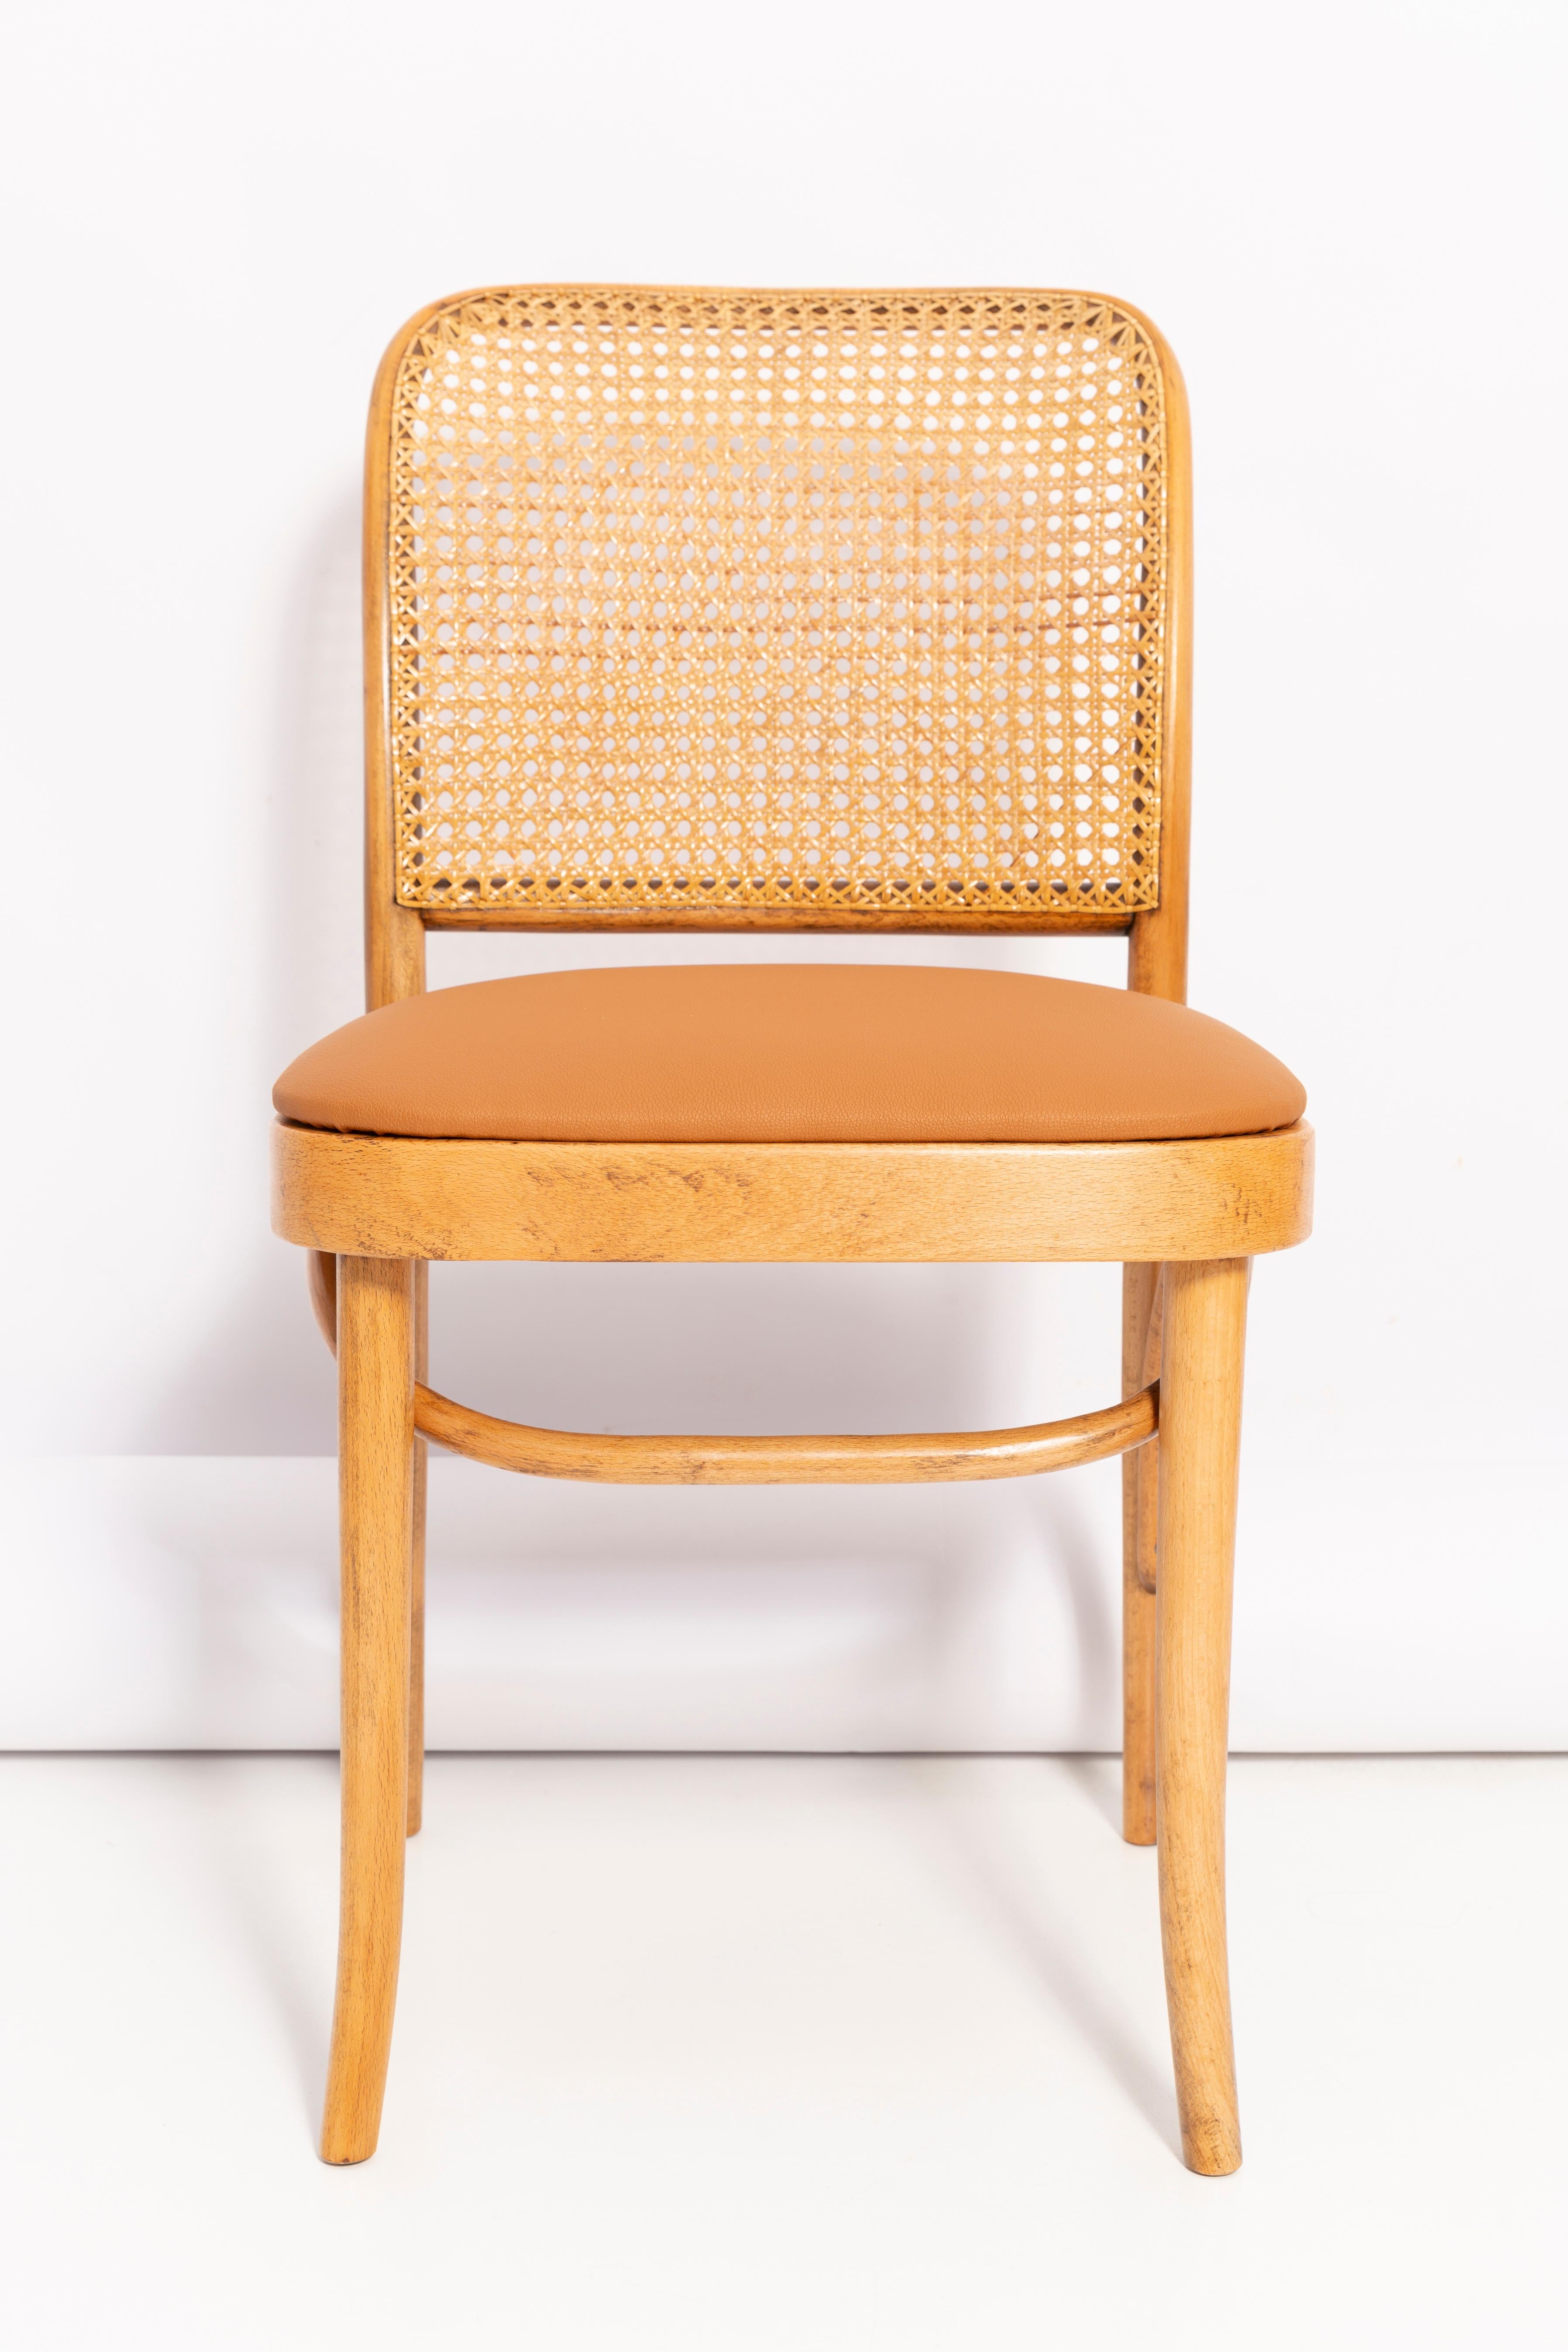 Set of Four Mid-Century Camel Faux Leather Thonet Wood Rattan Chairs, 1960s For Sale 1